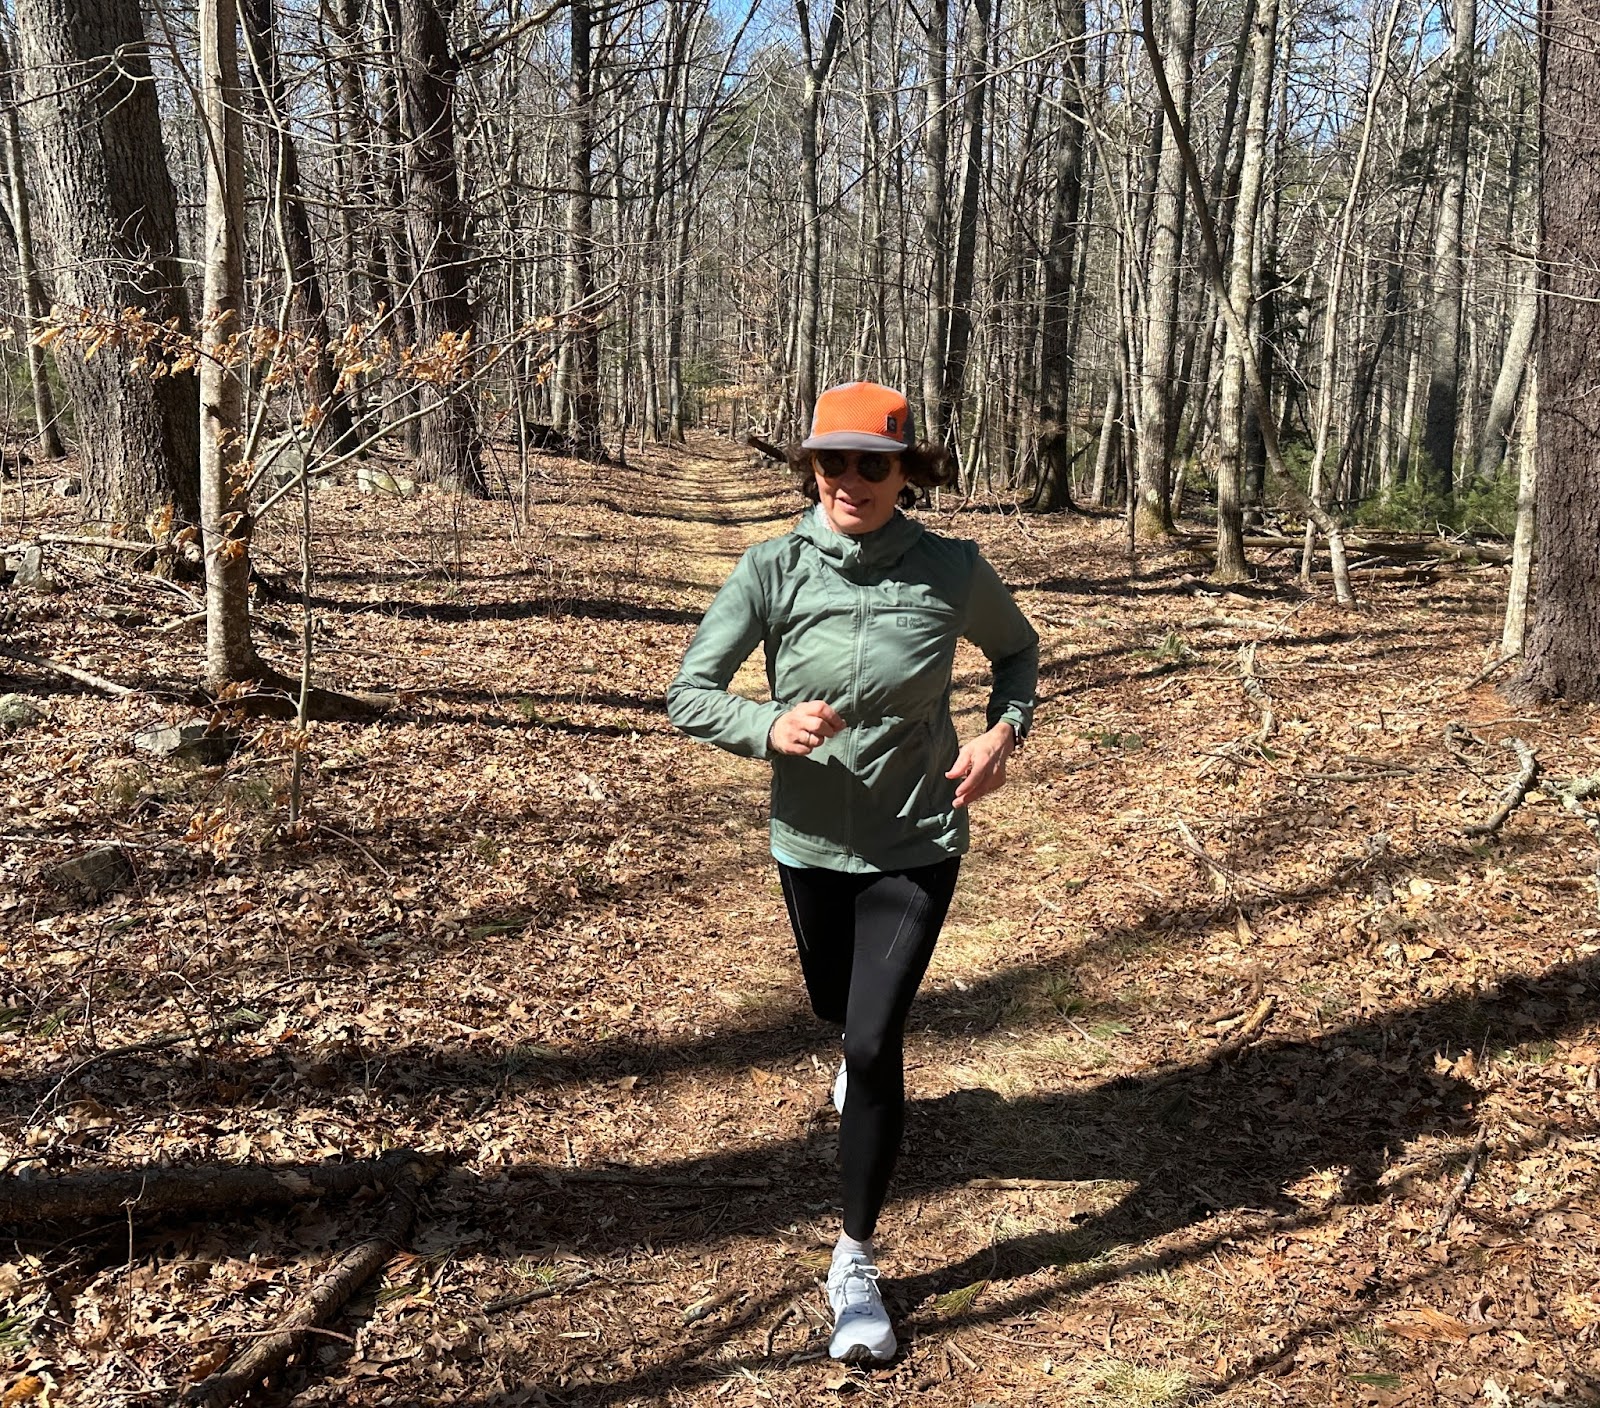 Road Trail Run: Jack Wolfskin Pre Light Alpha Jacket Women's and Men's  Jacket Reviews: Ultralight Insulation and Wind Protection